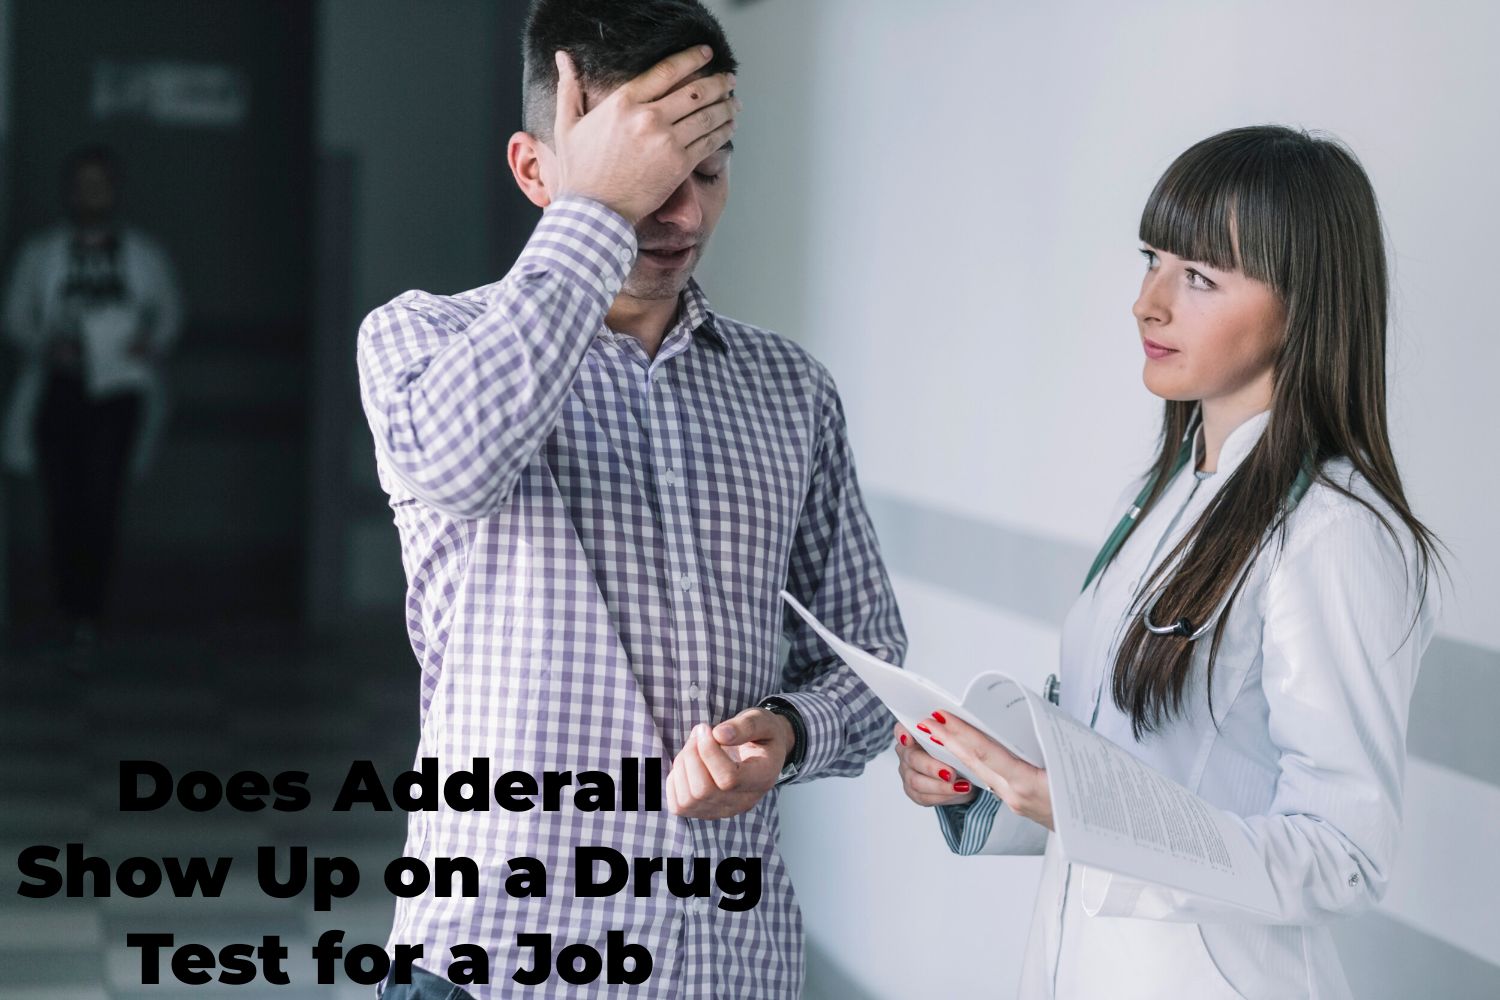 Does Adderall Show Up on a Drug Test for a Job?